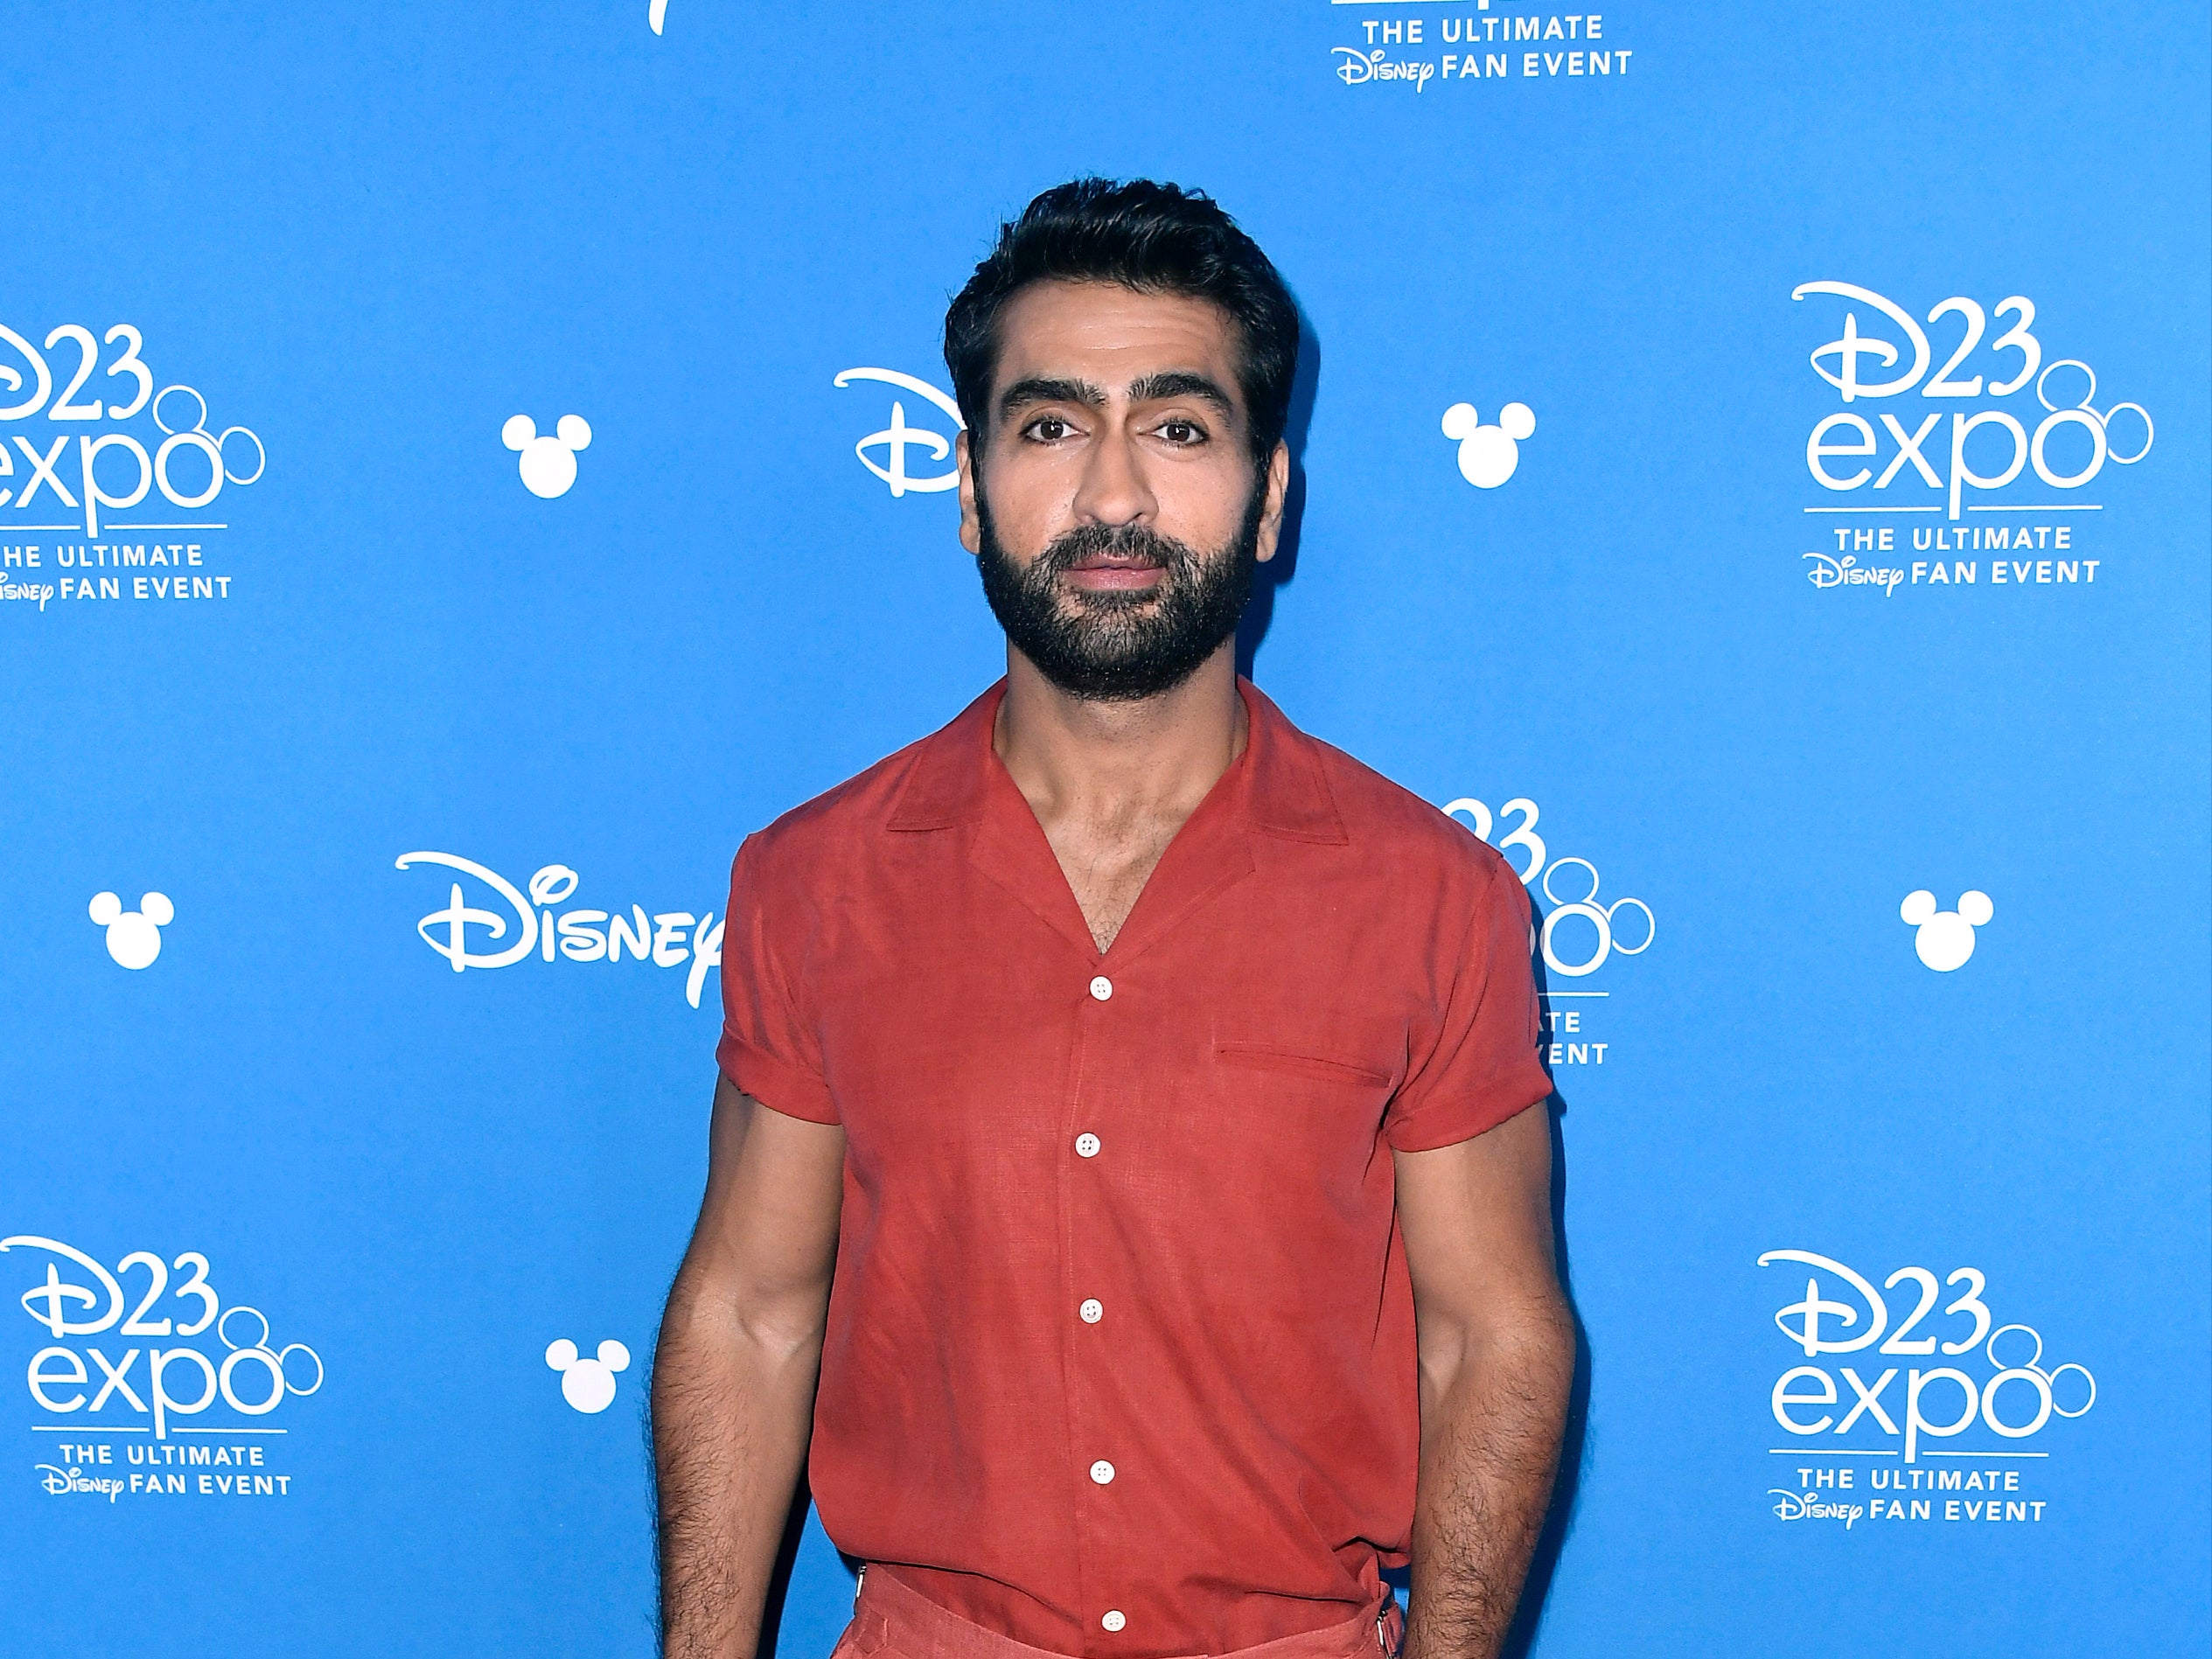 Kumail Nanjiani discusses transformation photos he shared to Instagram